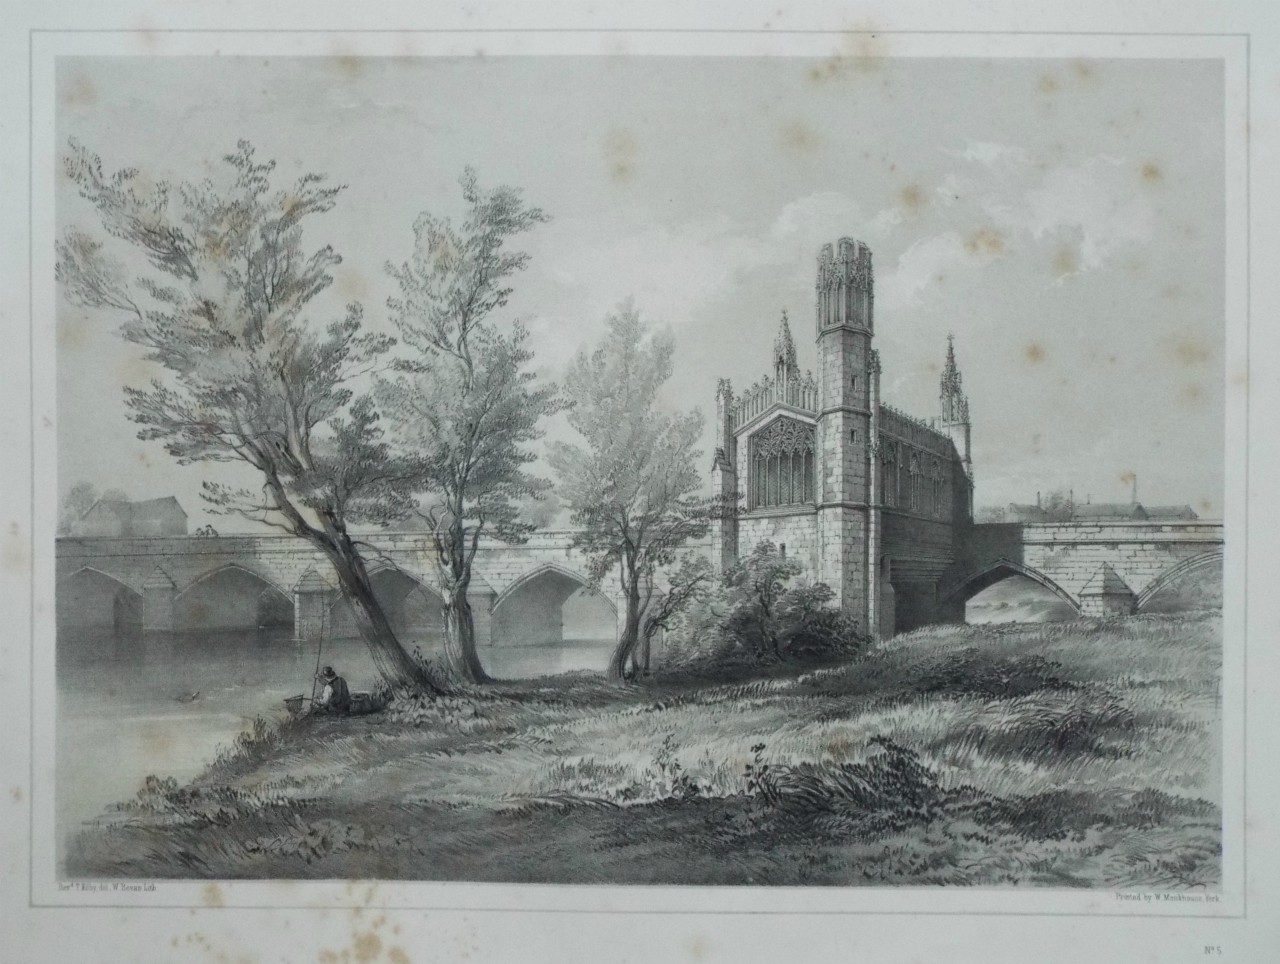 Lithograph - (Wakefield - North-East View of Bridge and Chapel) - Bevan